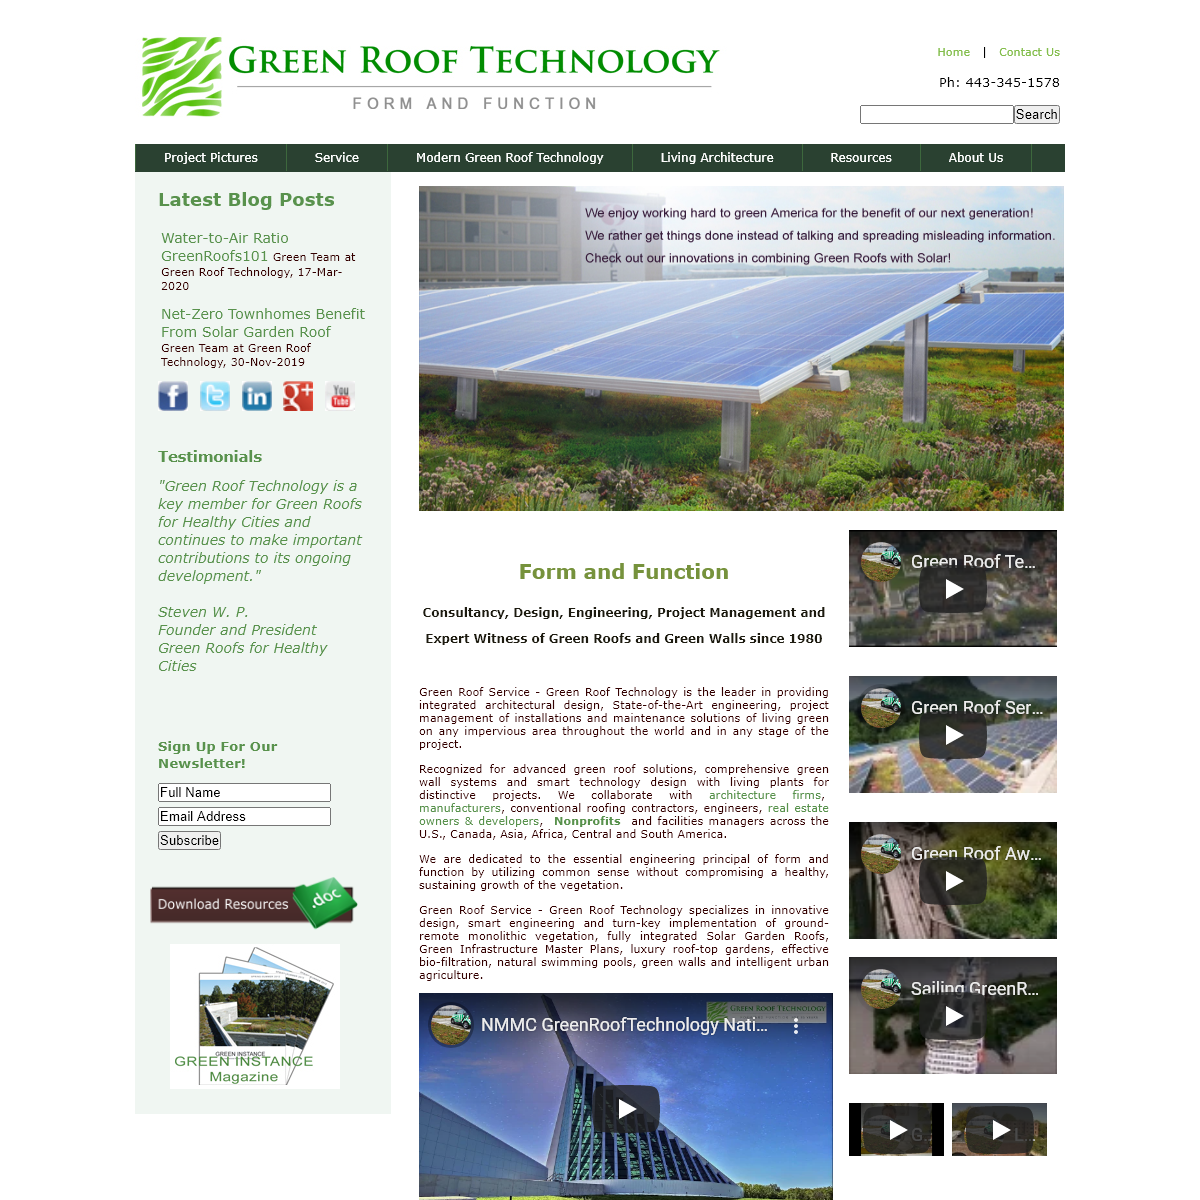 A complete backup of greenrooftechnology.com